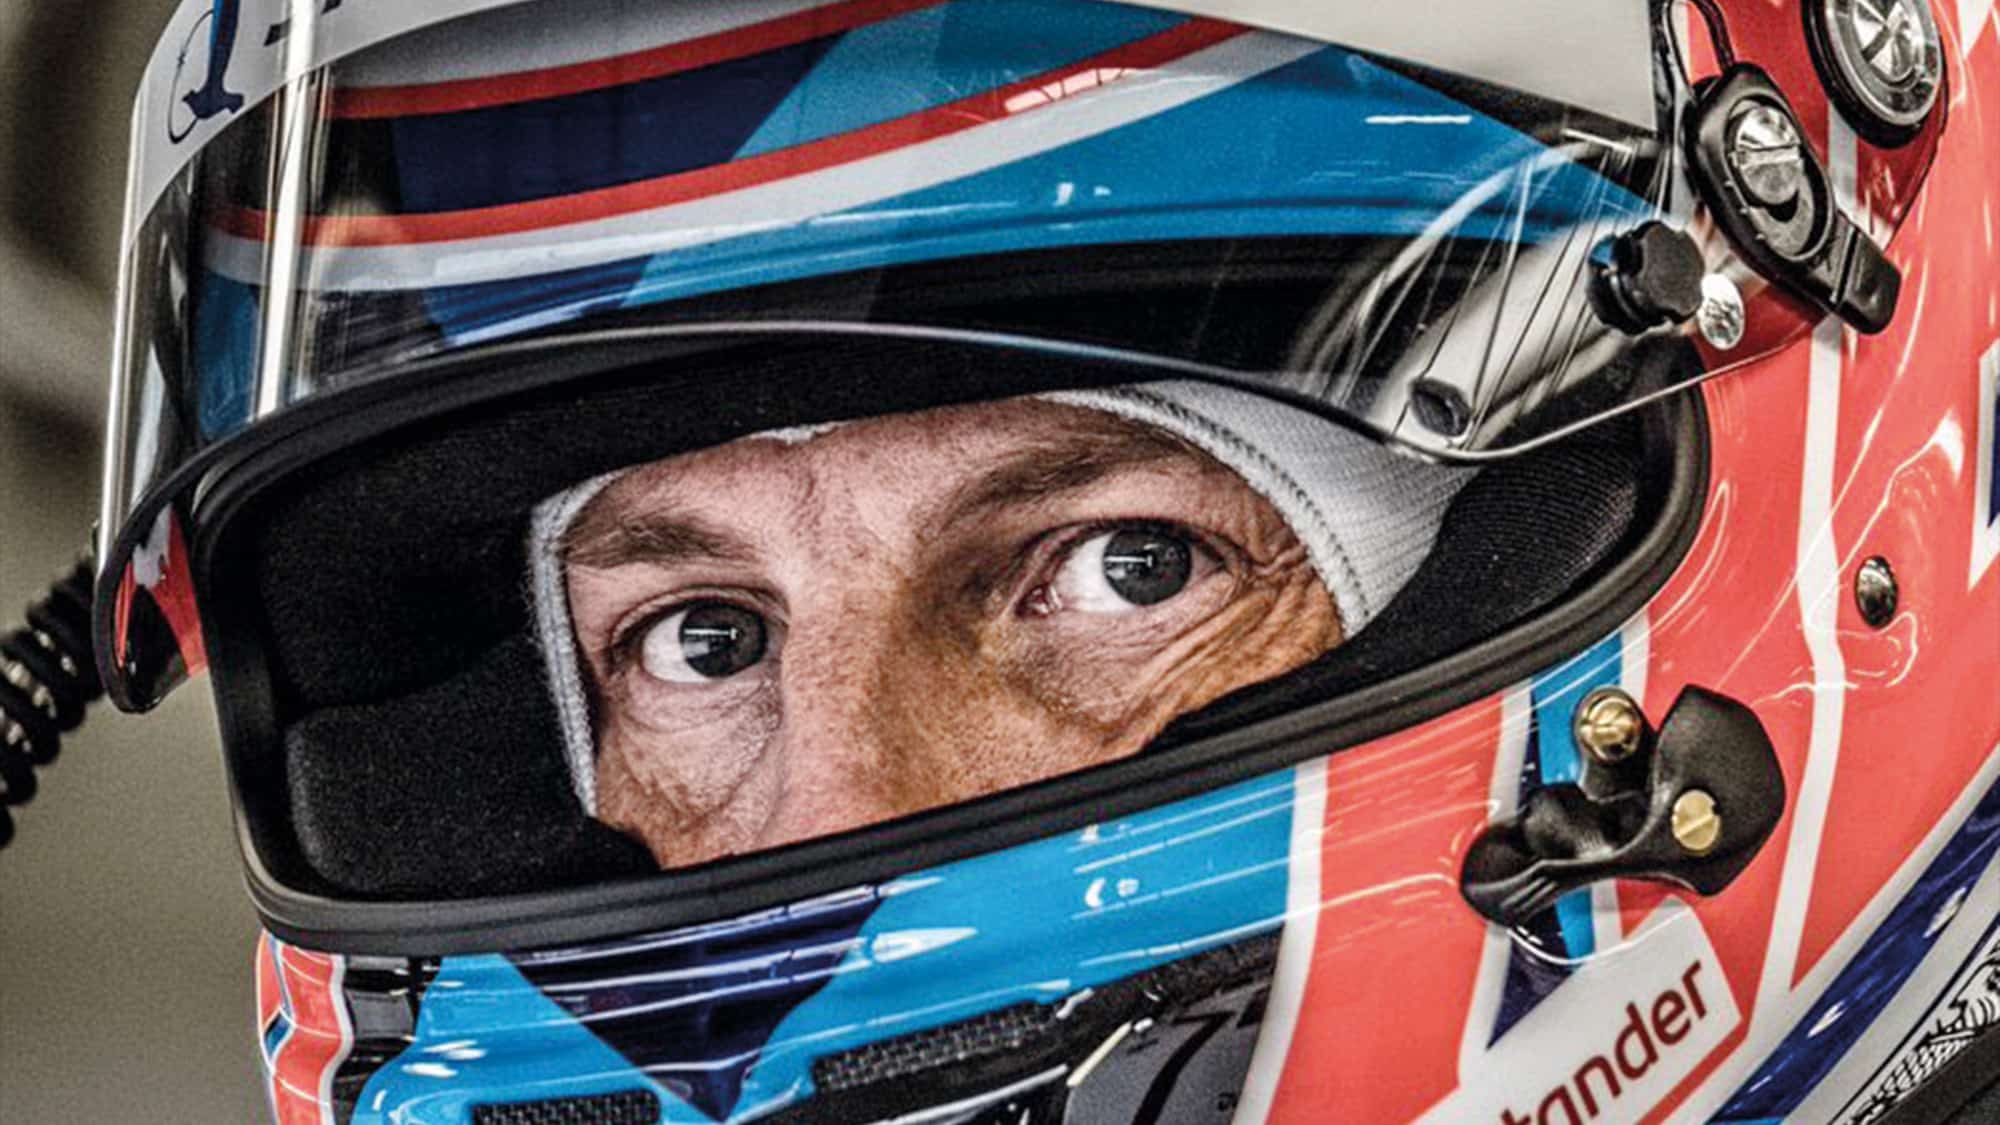 Jenson Button's eyes peer out from behind his helmet